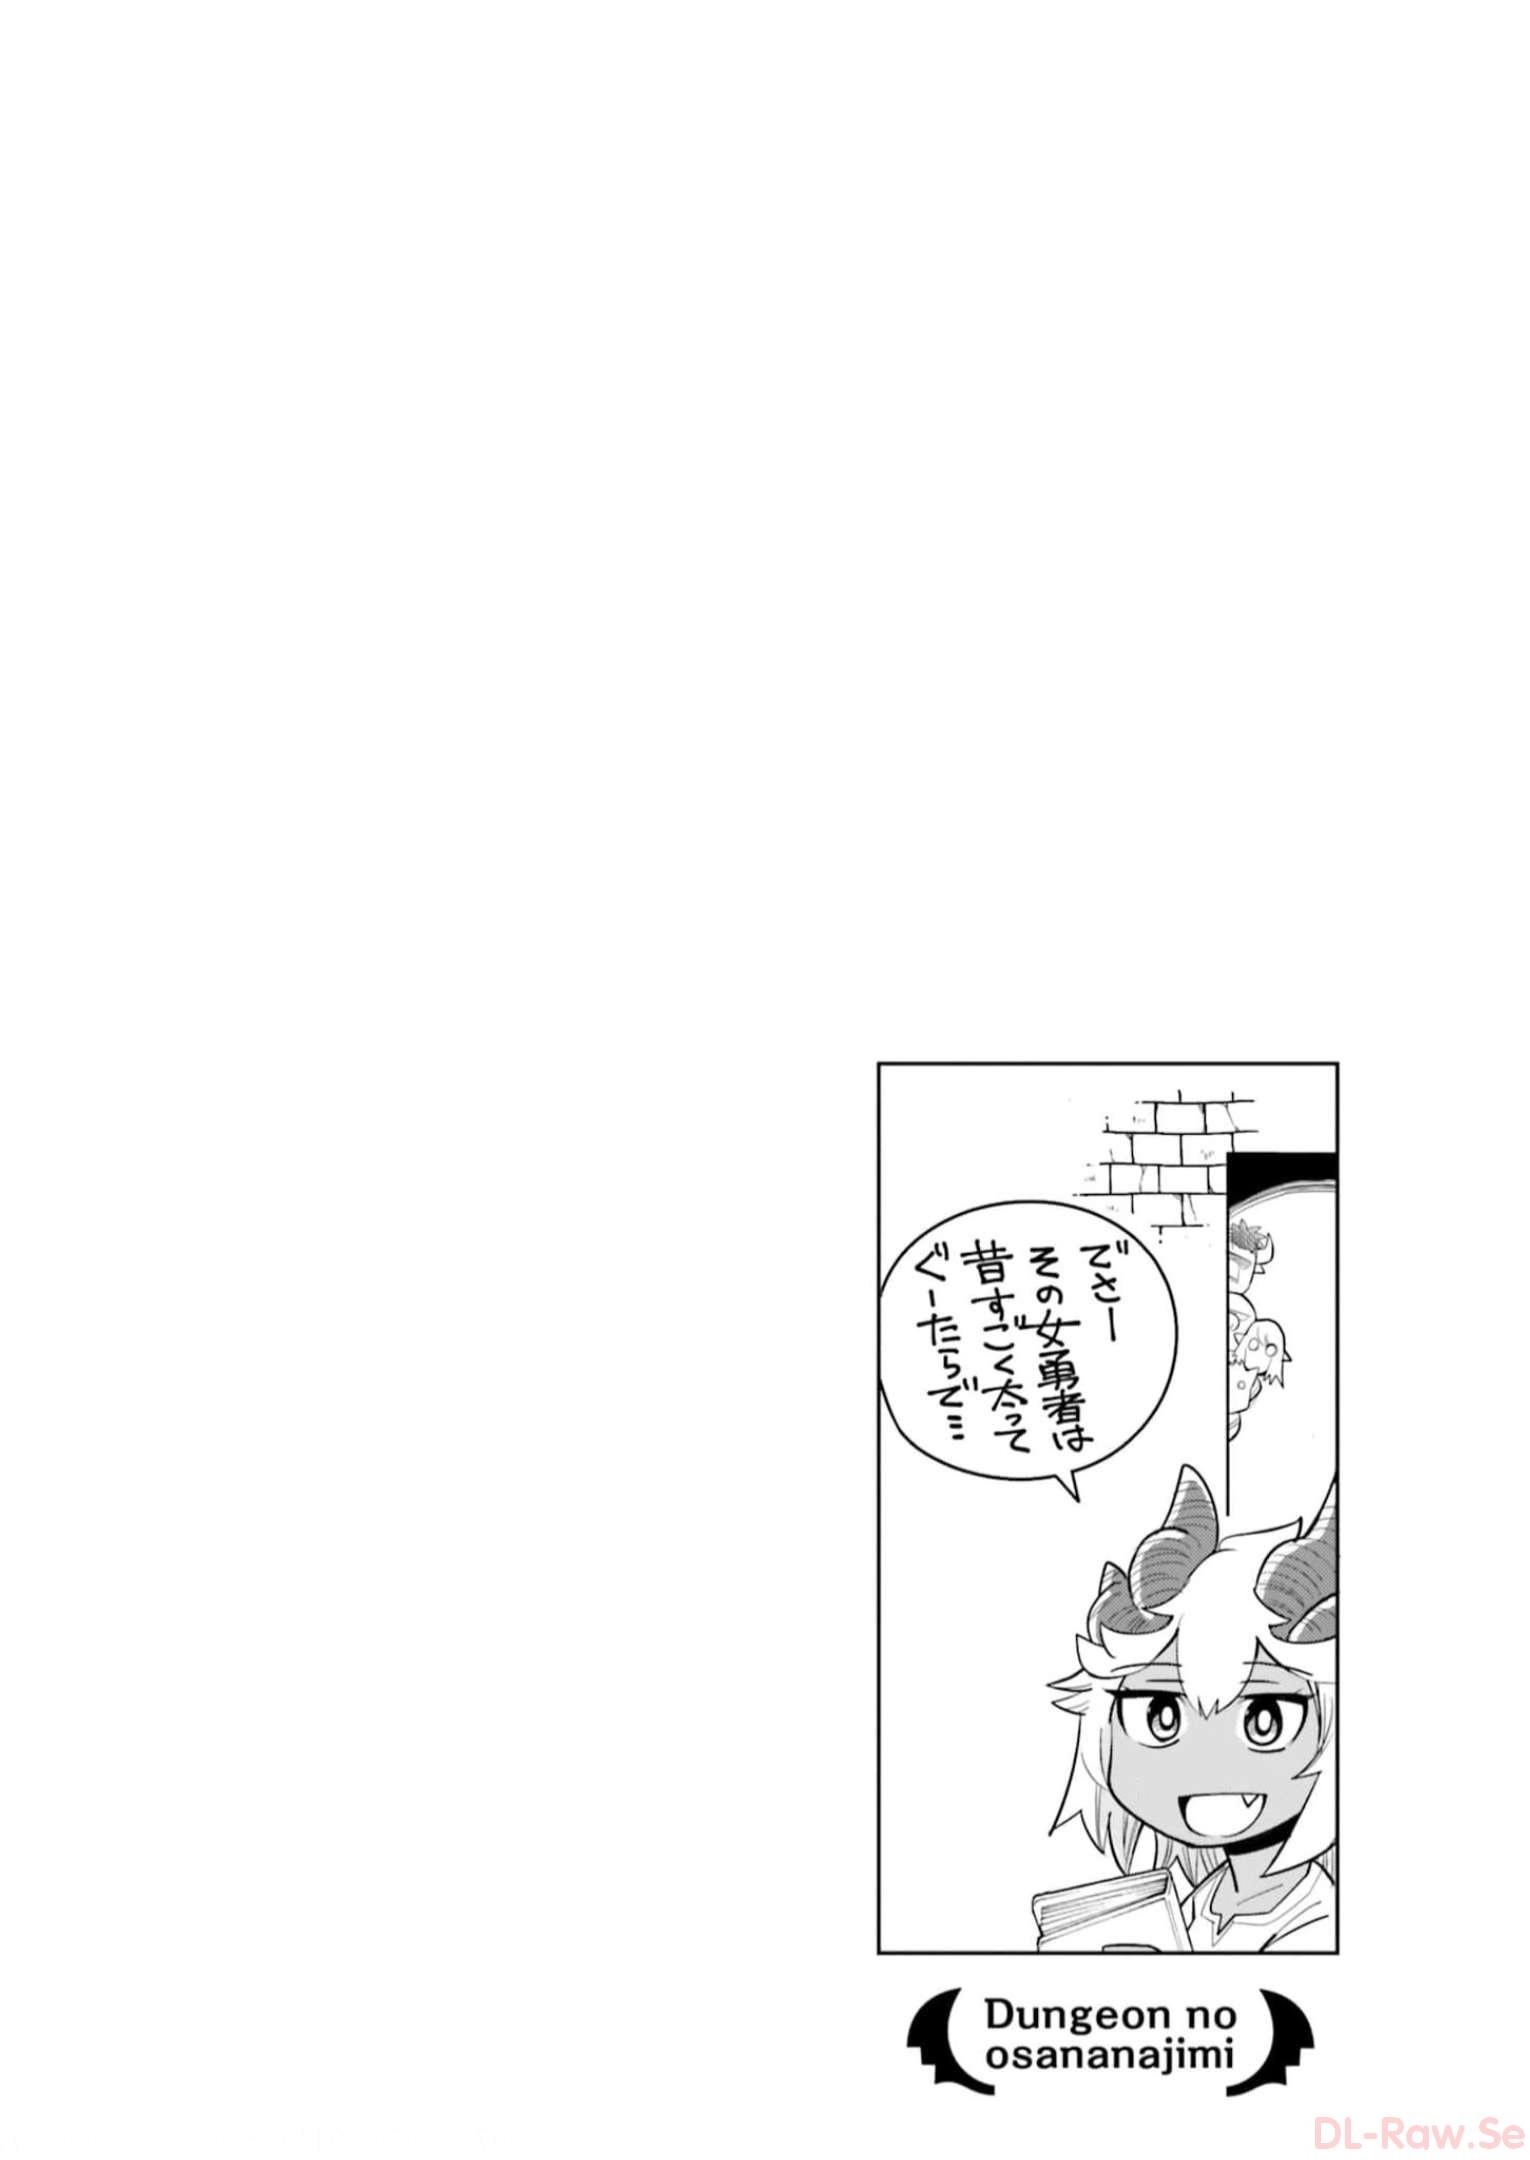 Dungeon Friends Forever Dungeon’s Childhood Friend ダンジョンの幼なじみ 第18.1話 - Page 6